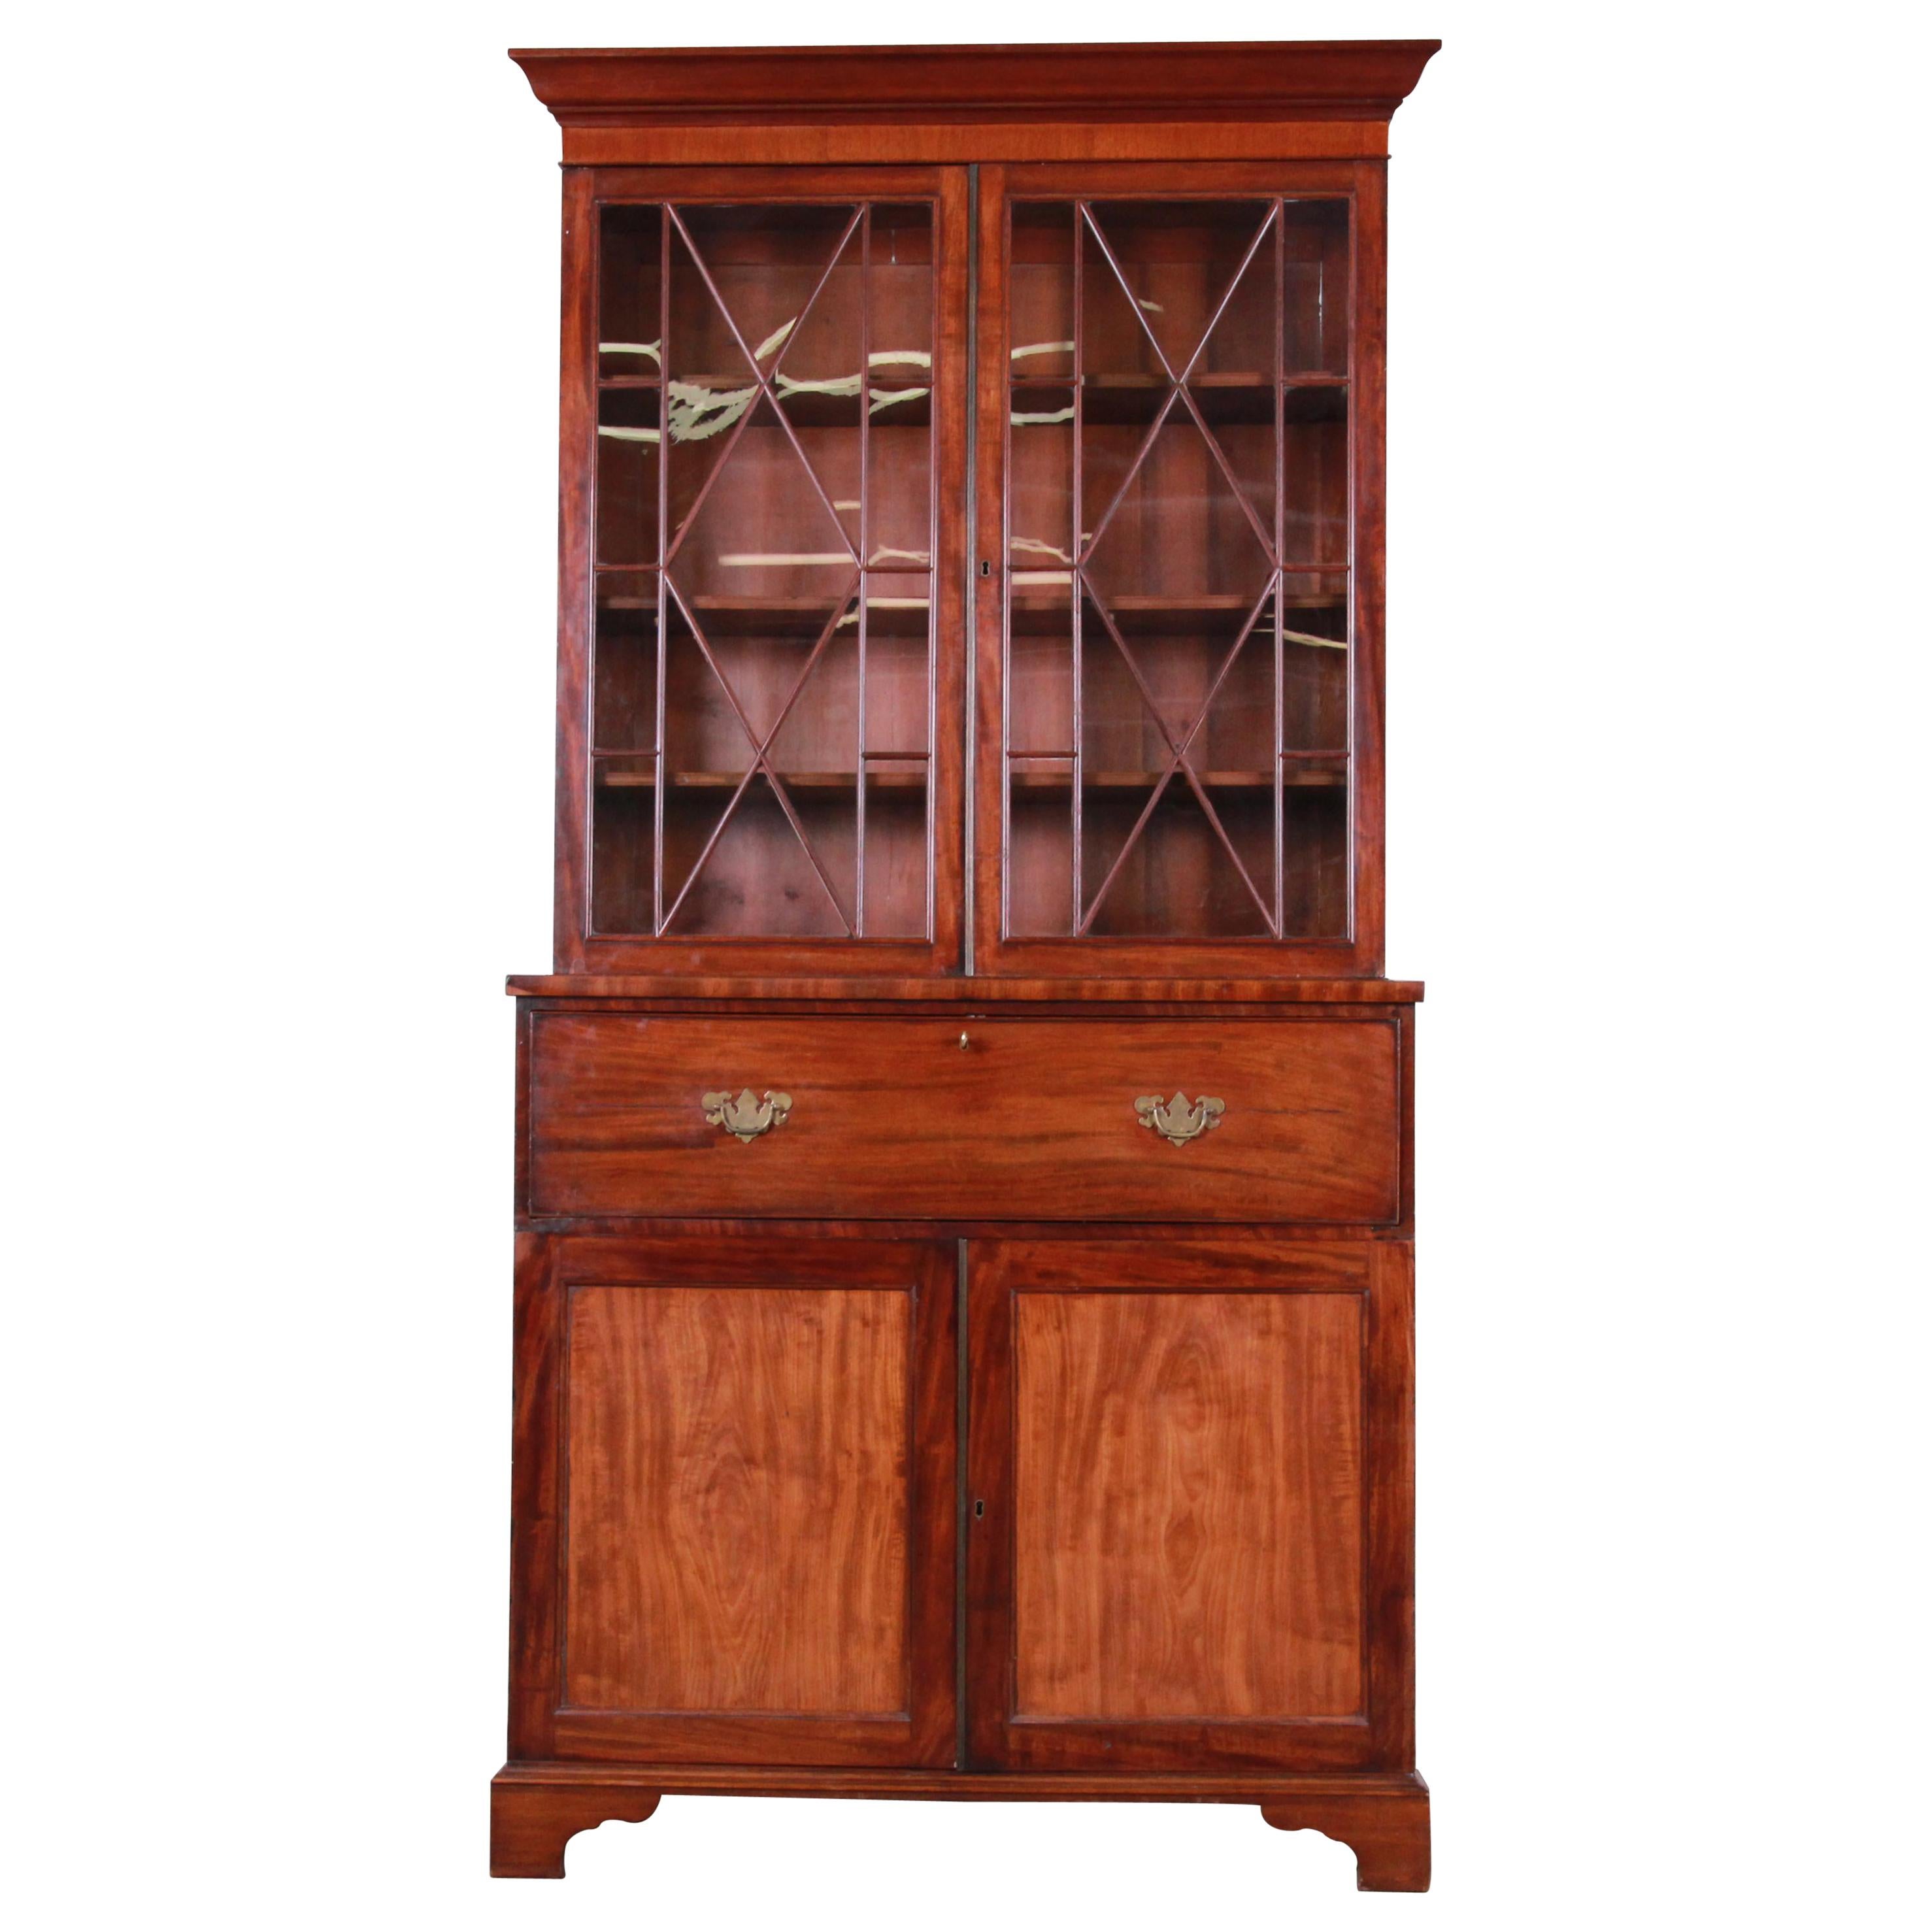 English George III Style Drop Front Secretary Desk with Bookcase, circa 1870